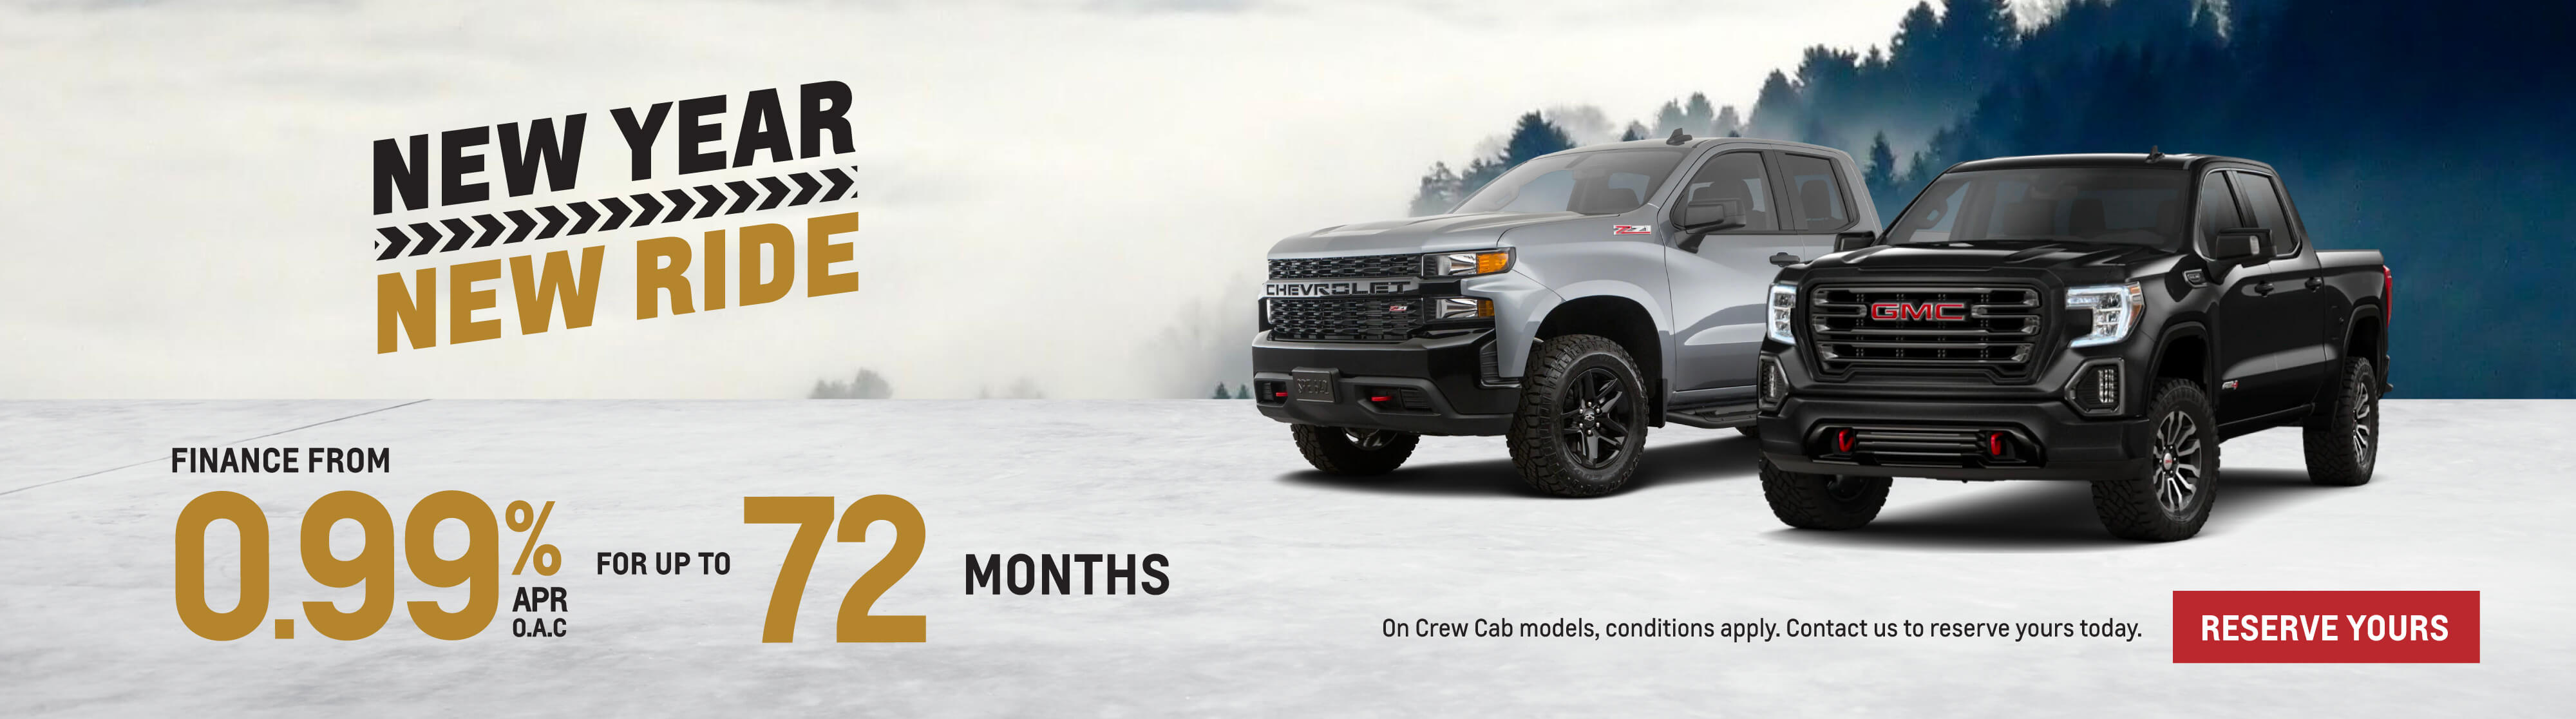 City Chevrolet - New Year New Ride in Toronto